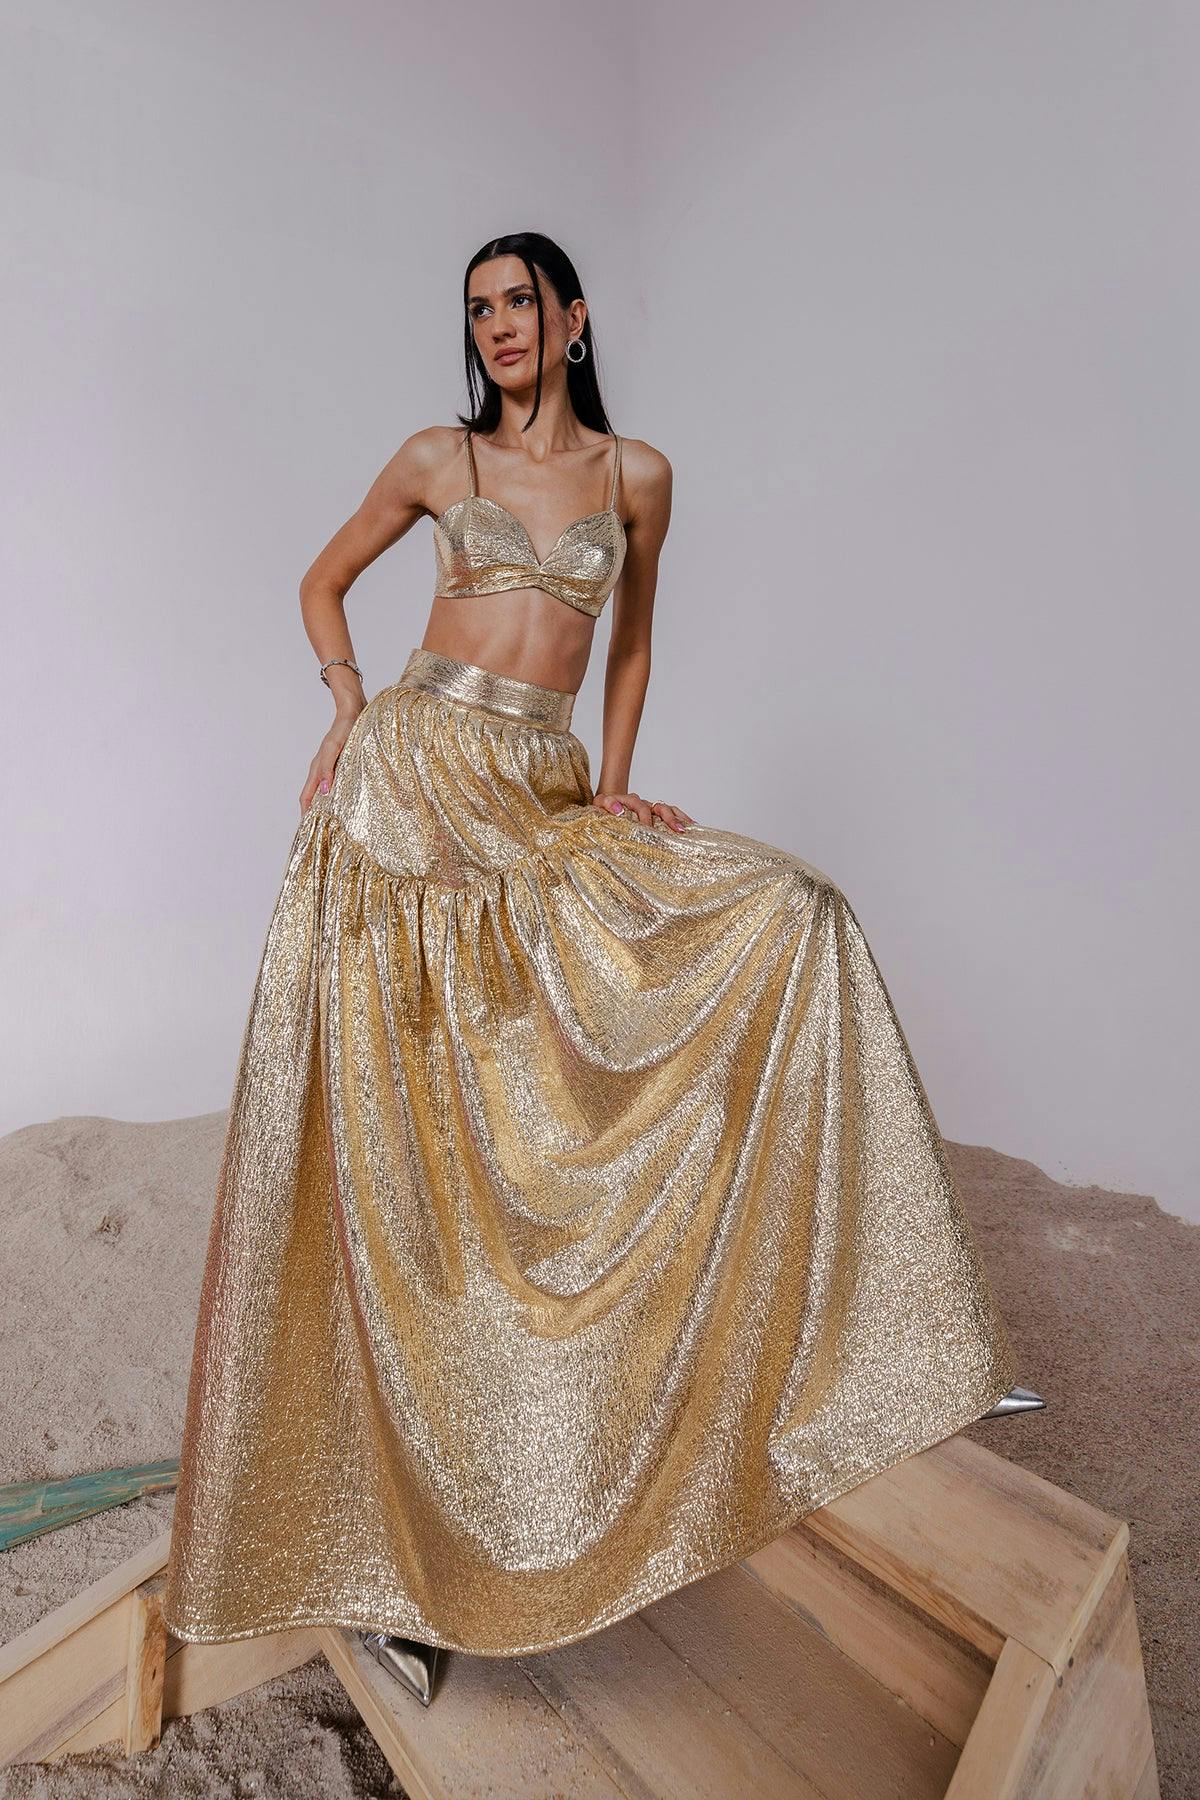 CAIA GOLD METALLIC BRALETTE & LONG SKIRT, a product by July Issue